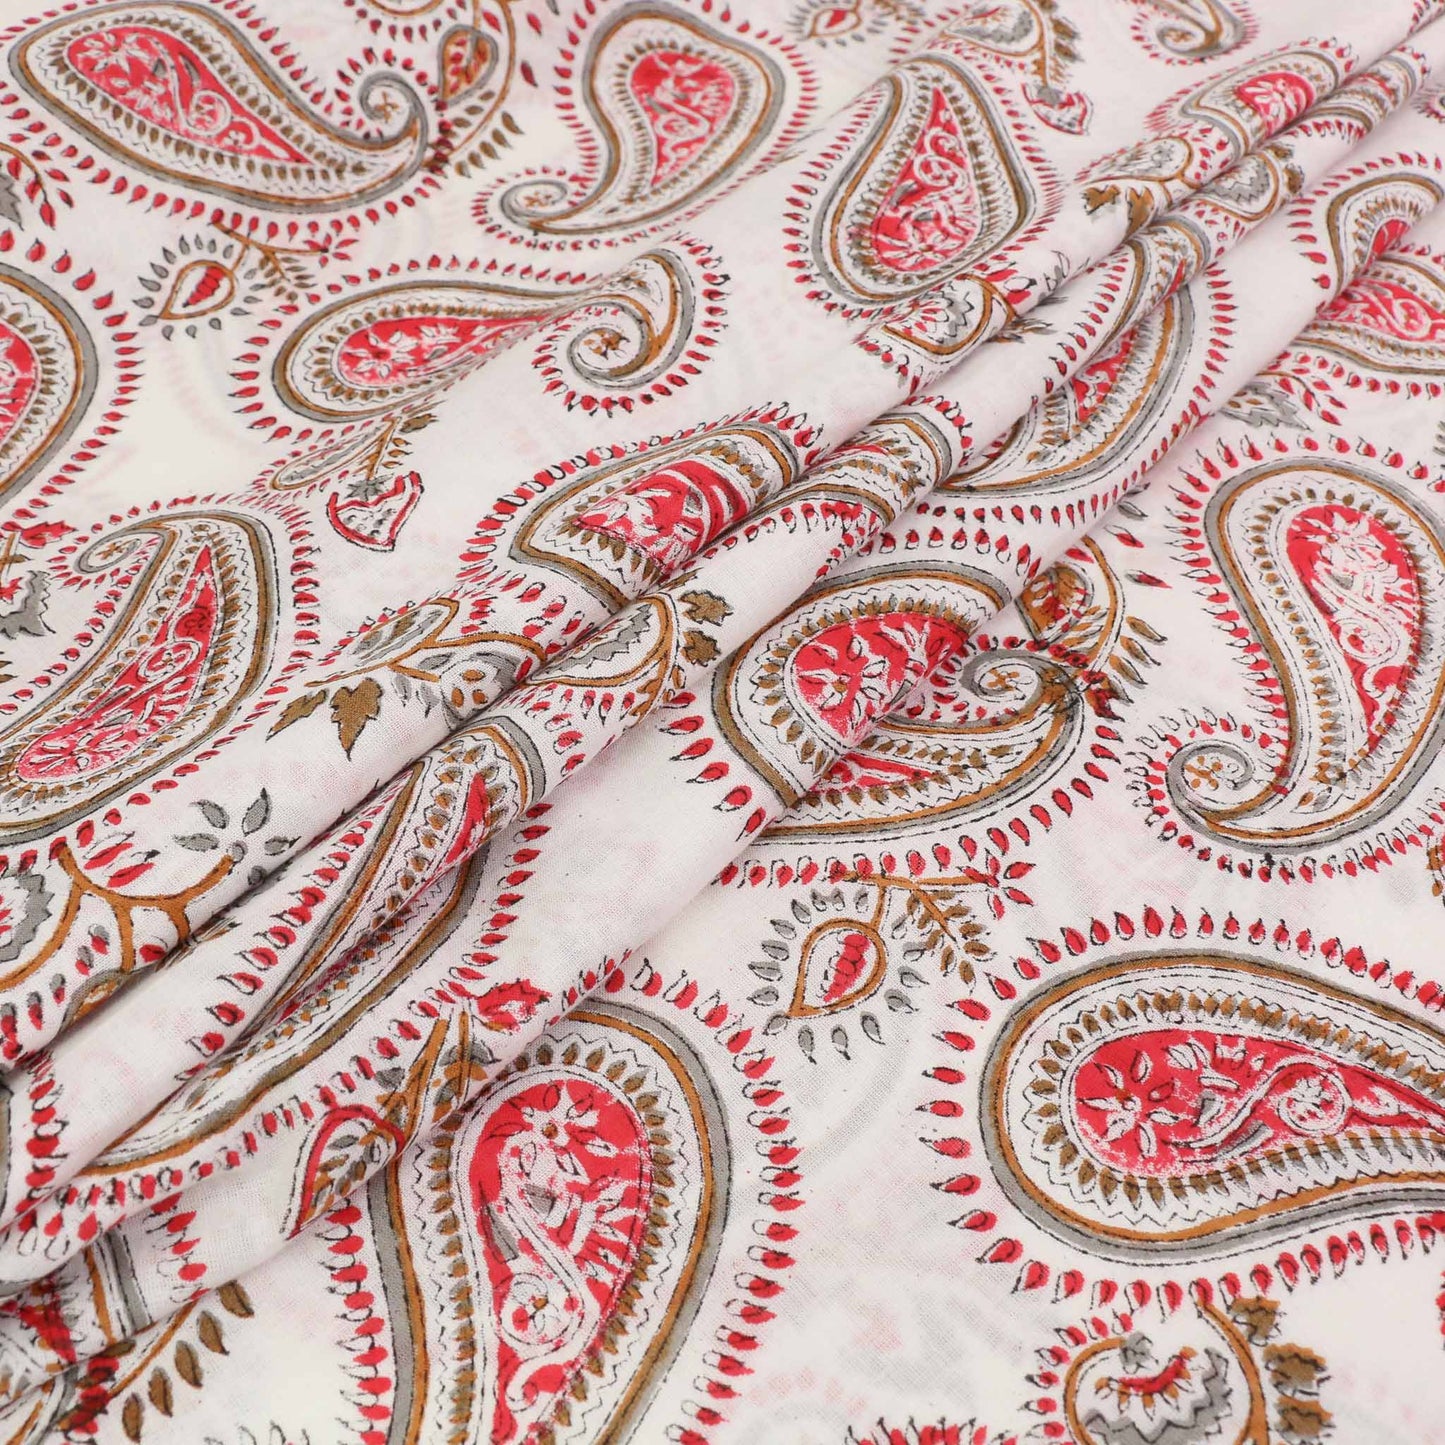 Cotton Voile - Hand block print - White, red